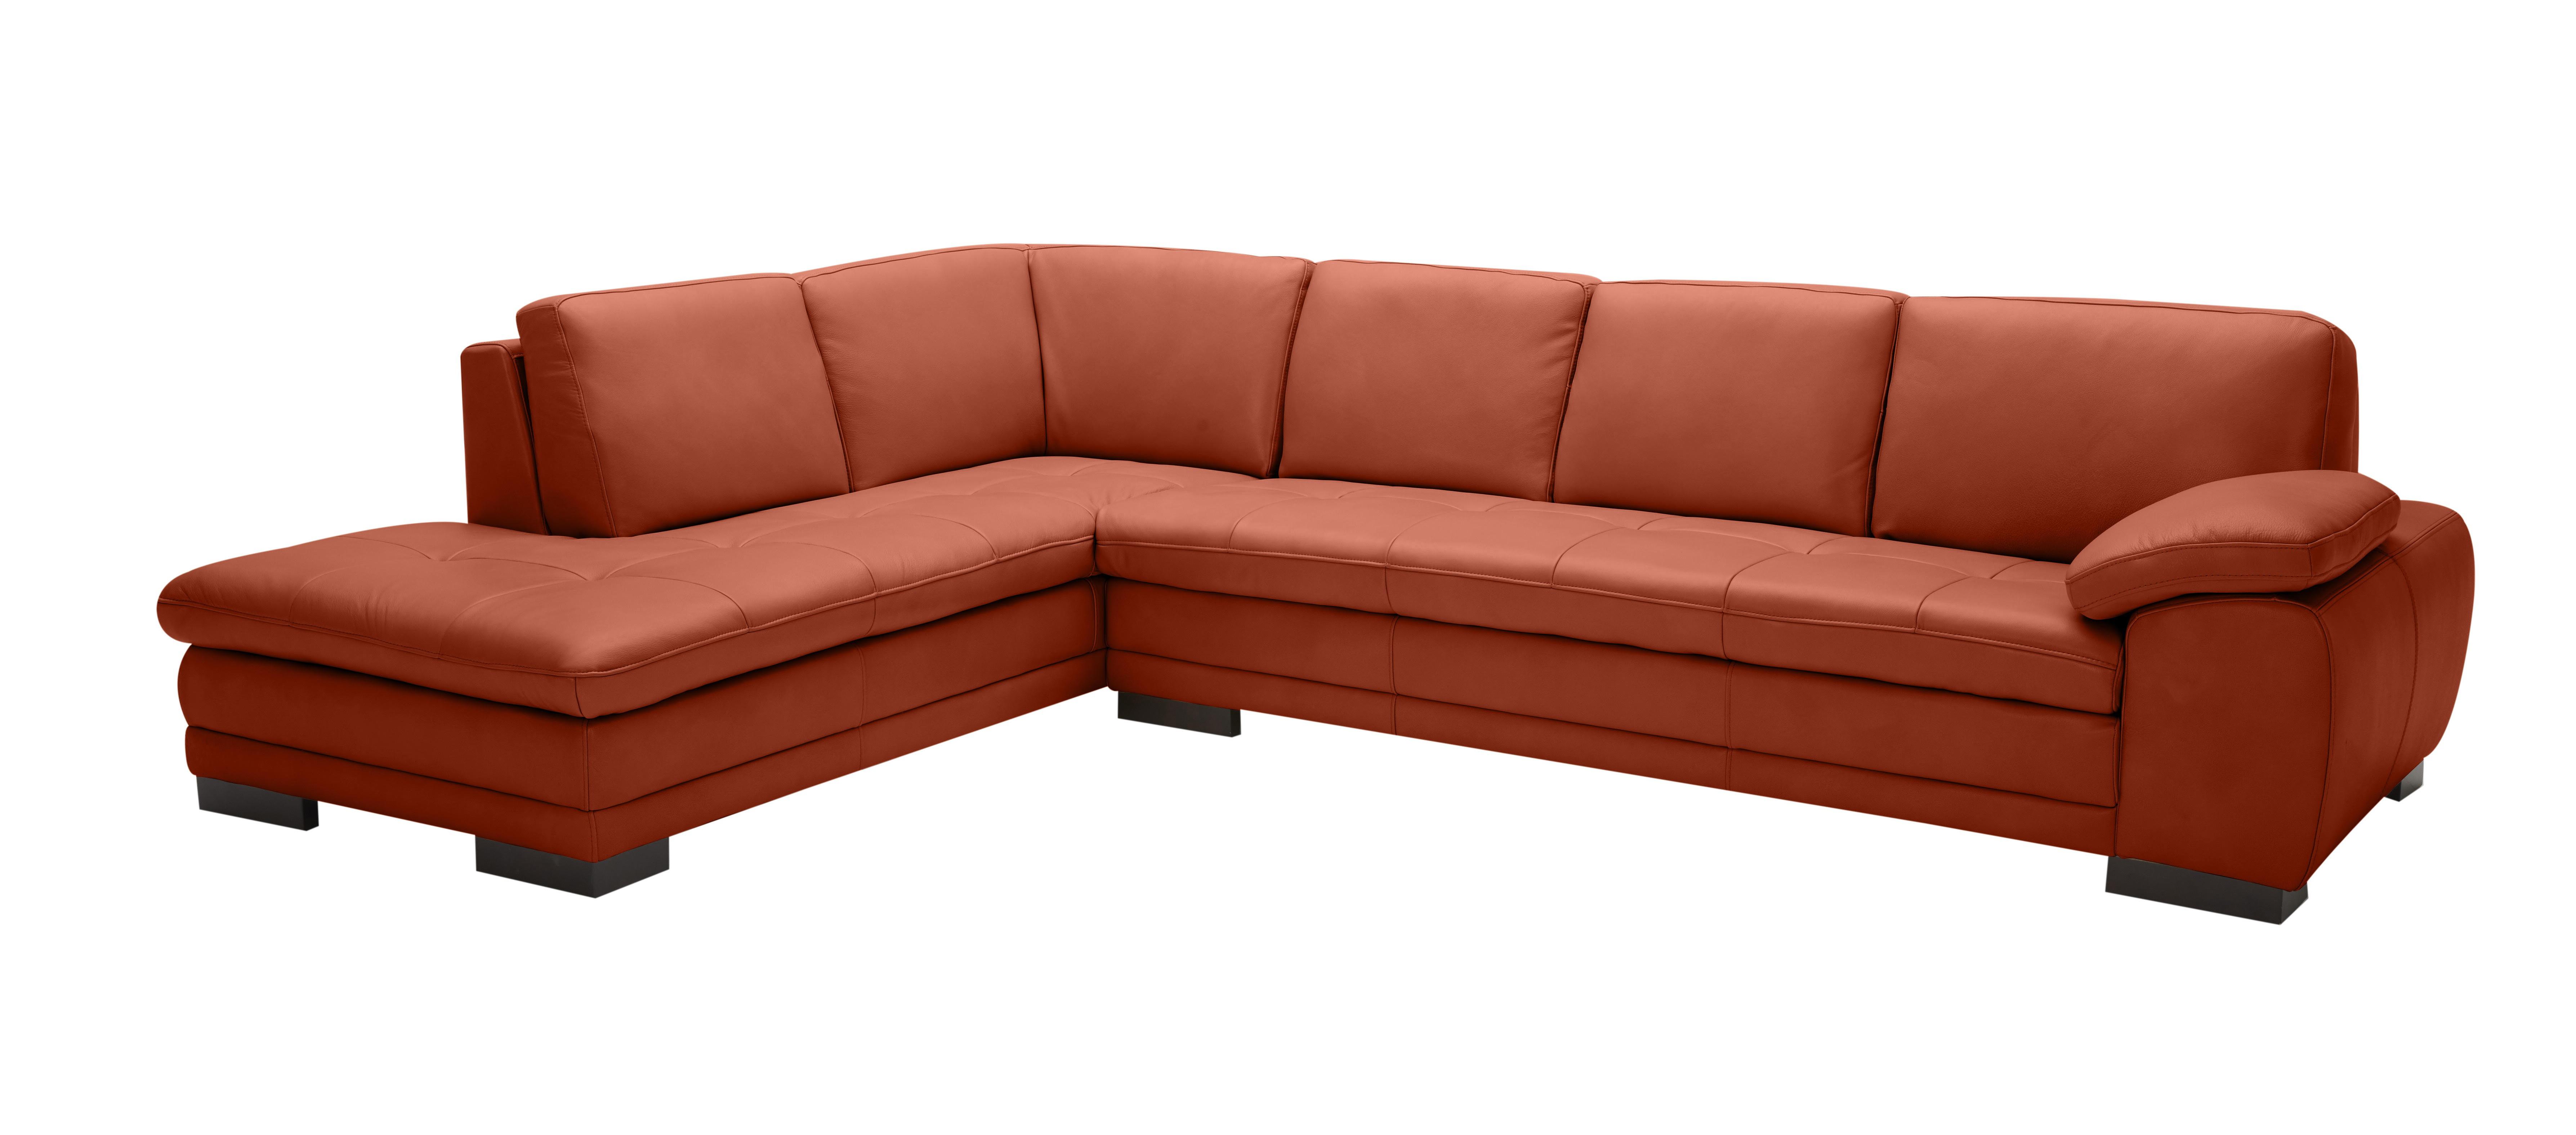 Contemporary Sectional Sofa 625 SKU175443111 in Orange Leather